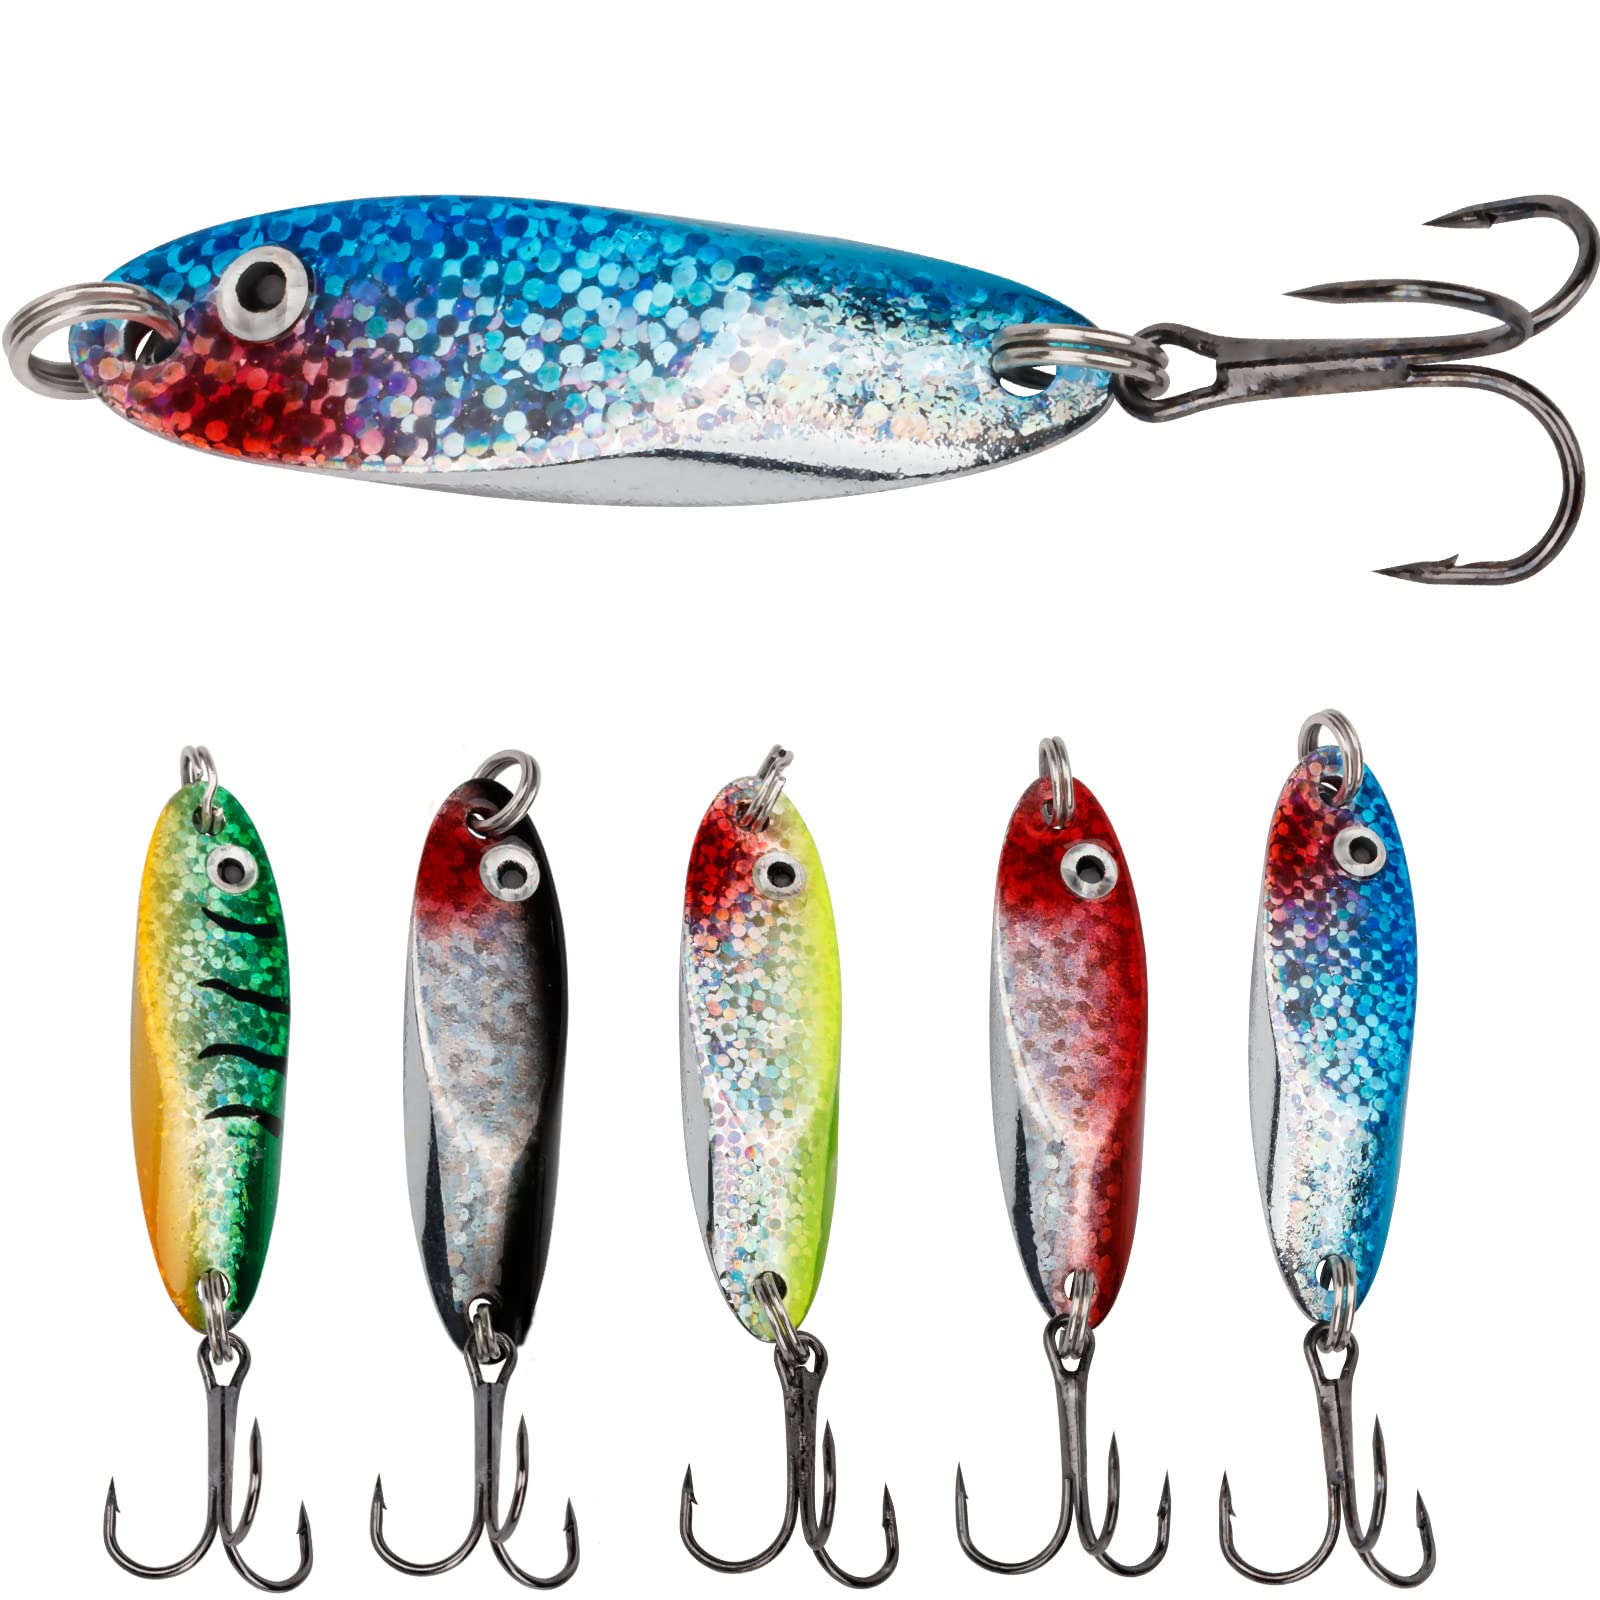 THKFISH Fishing Lures Fishing Spoons Trout Lures Saltwater Spoon